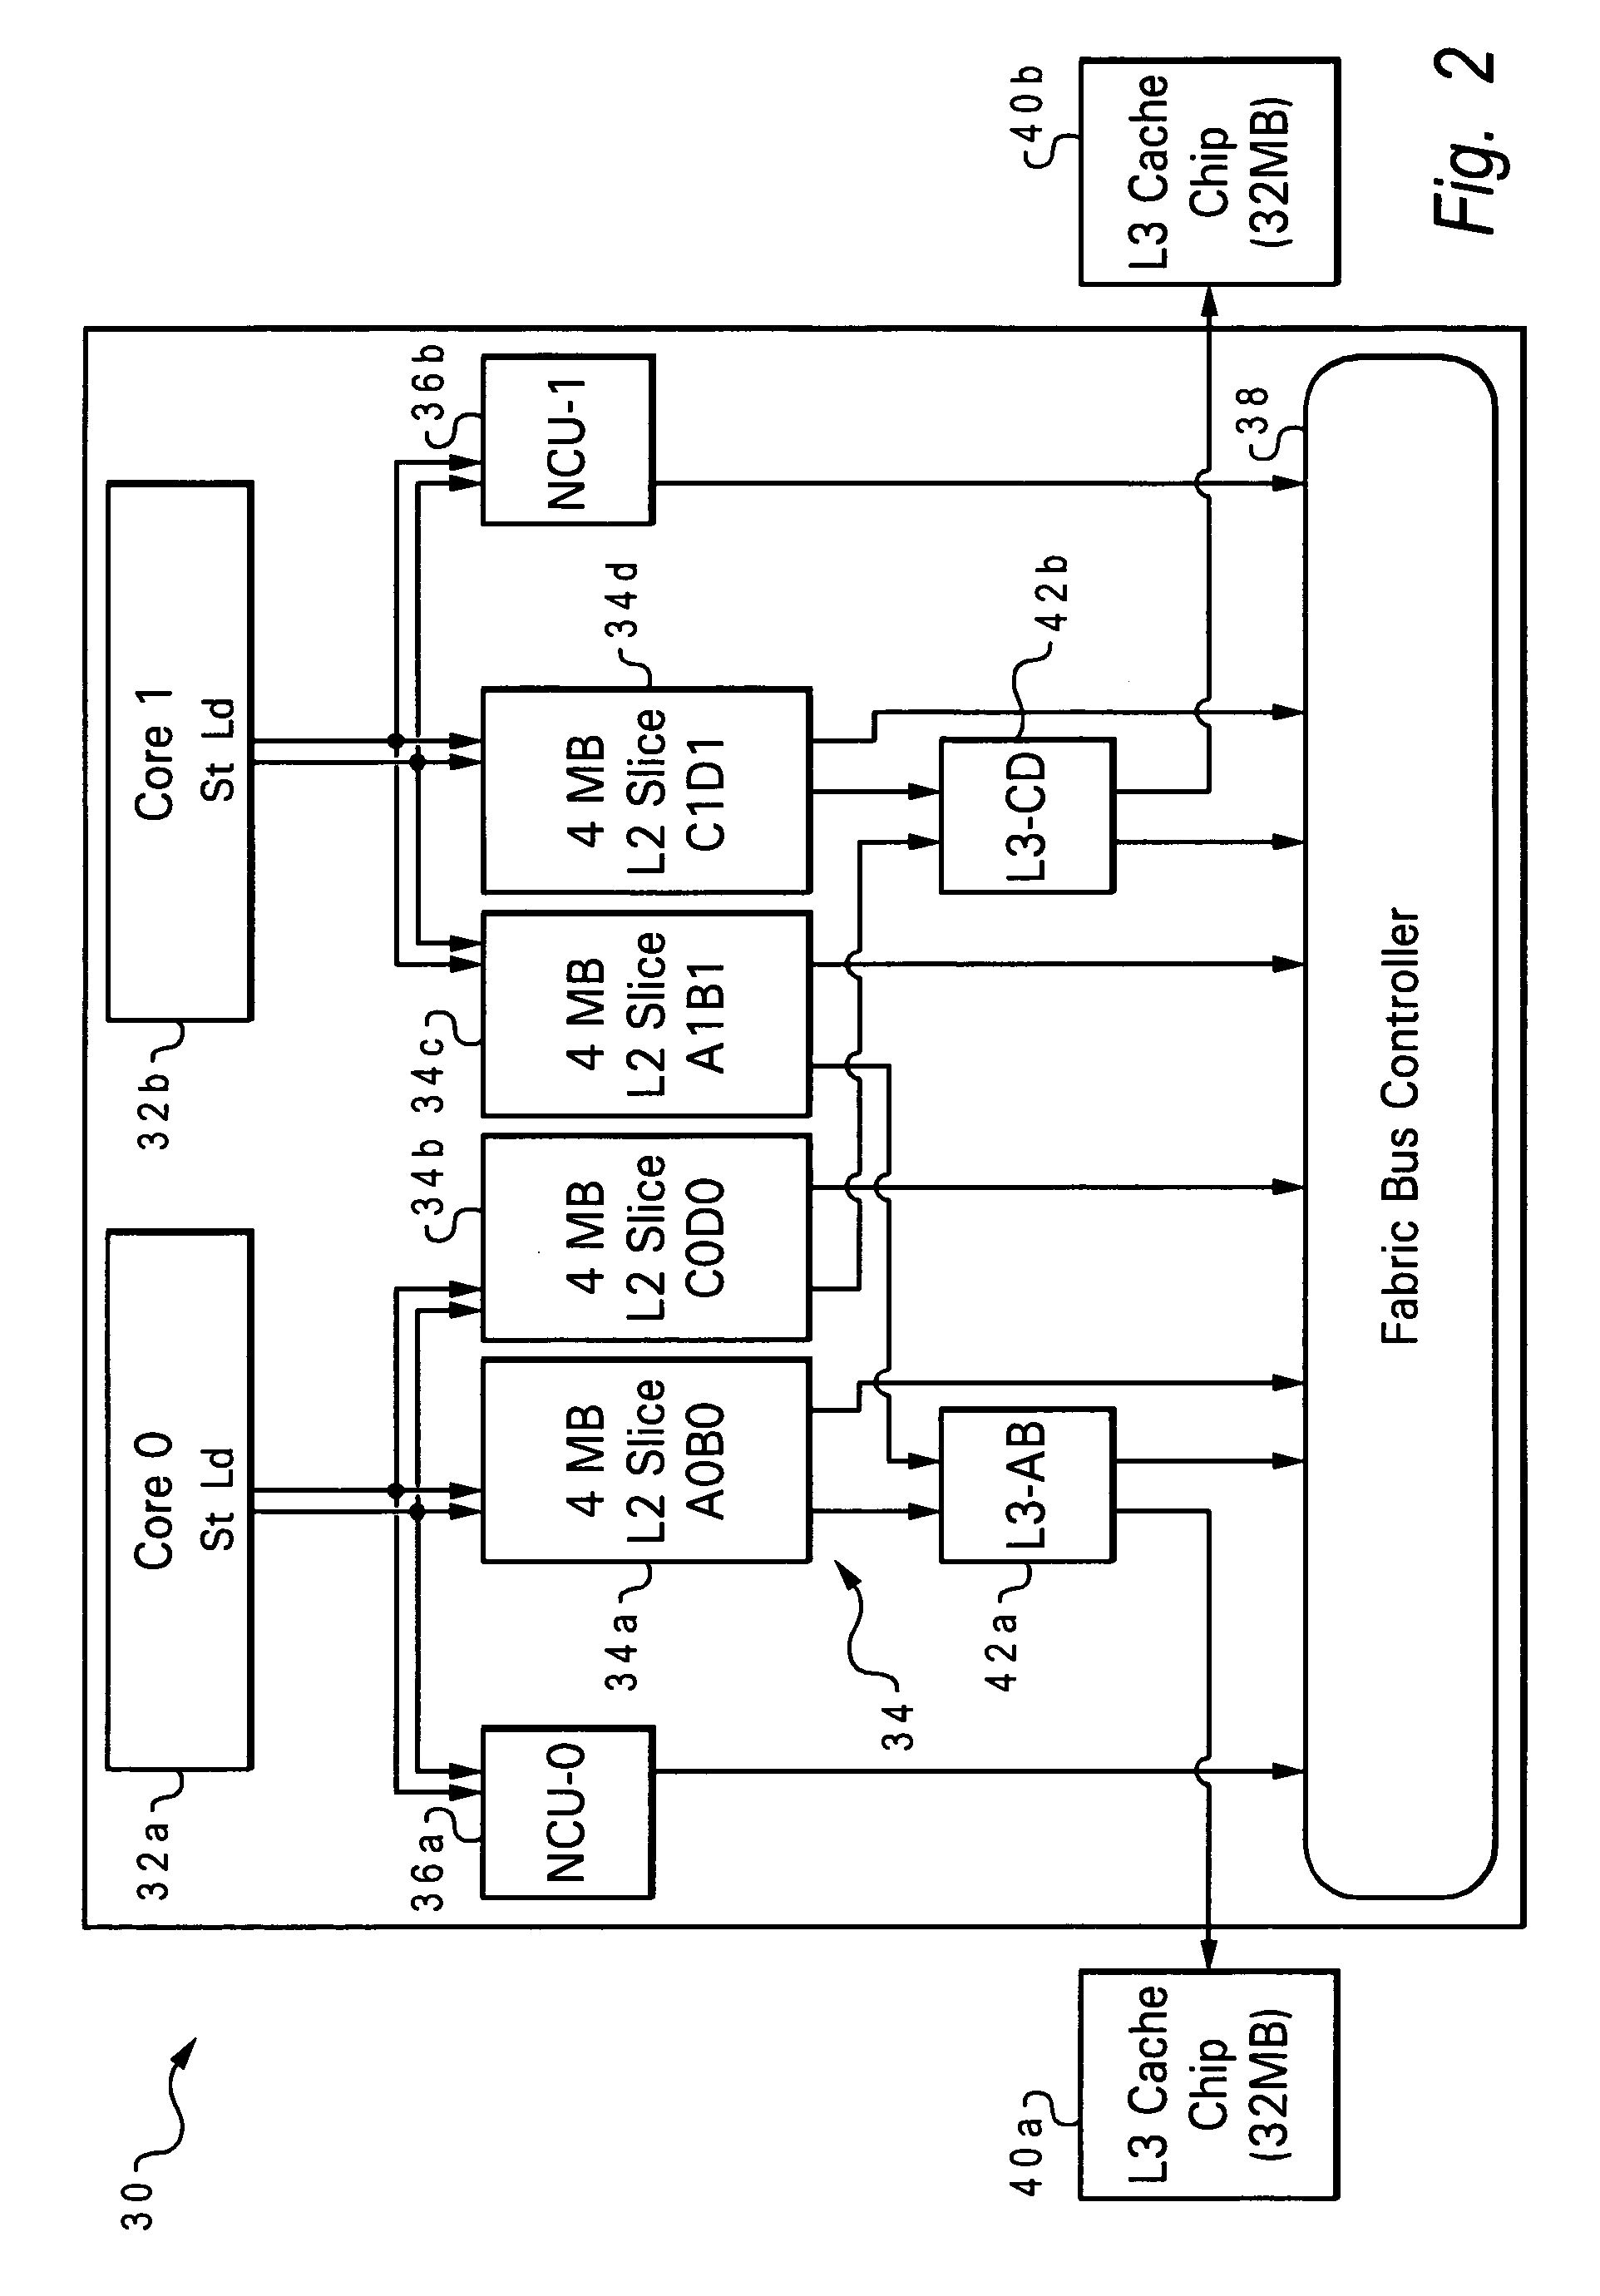 System bus structure for large L2 cache array topology with different latency domains